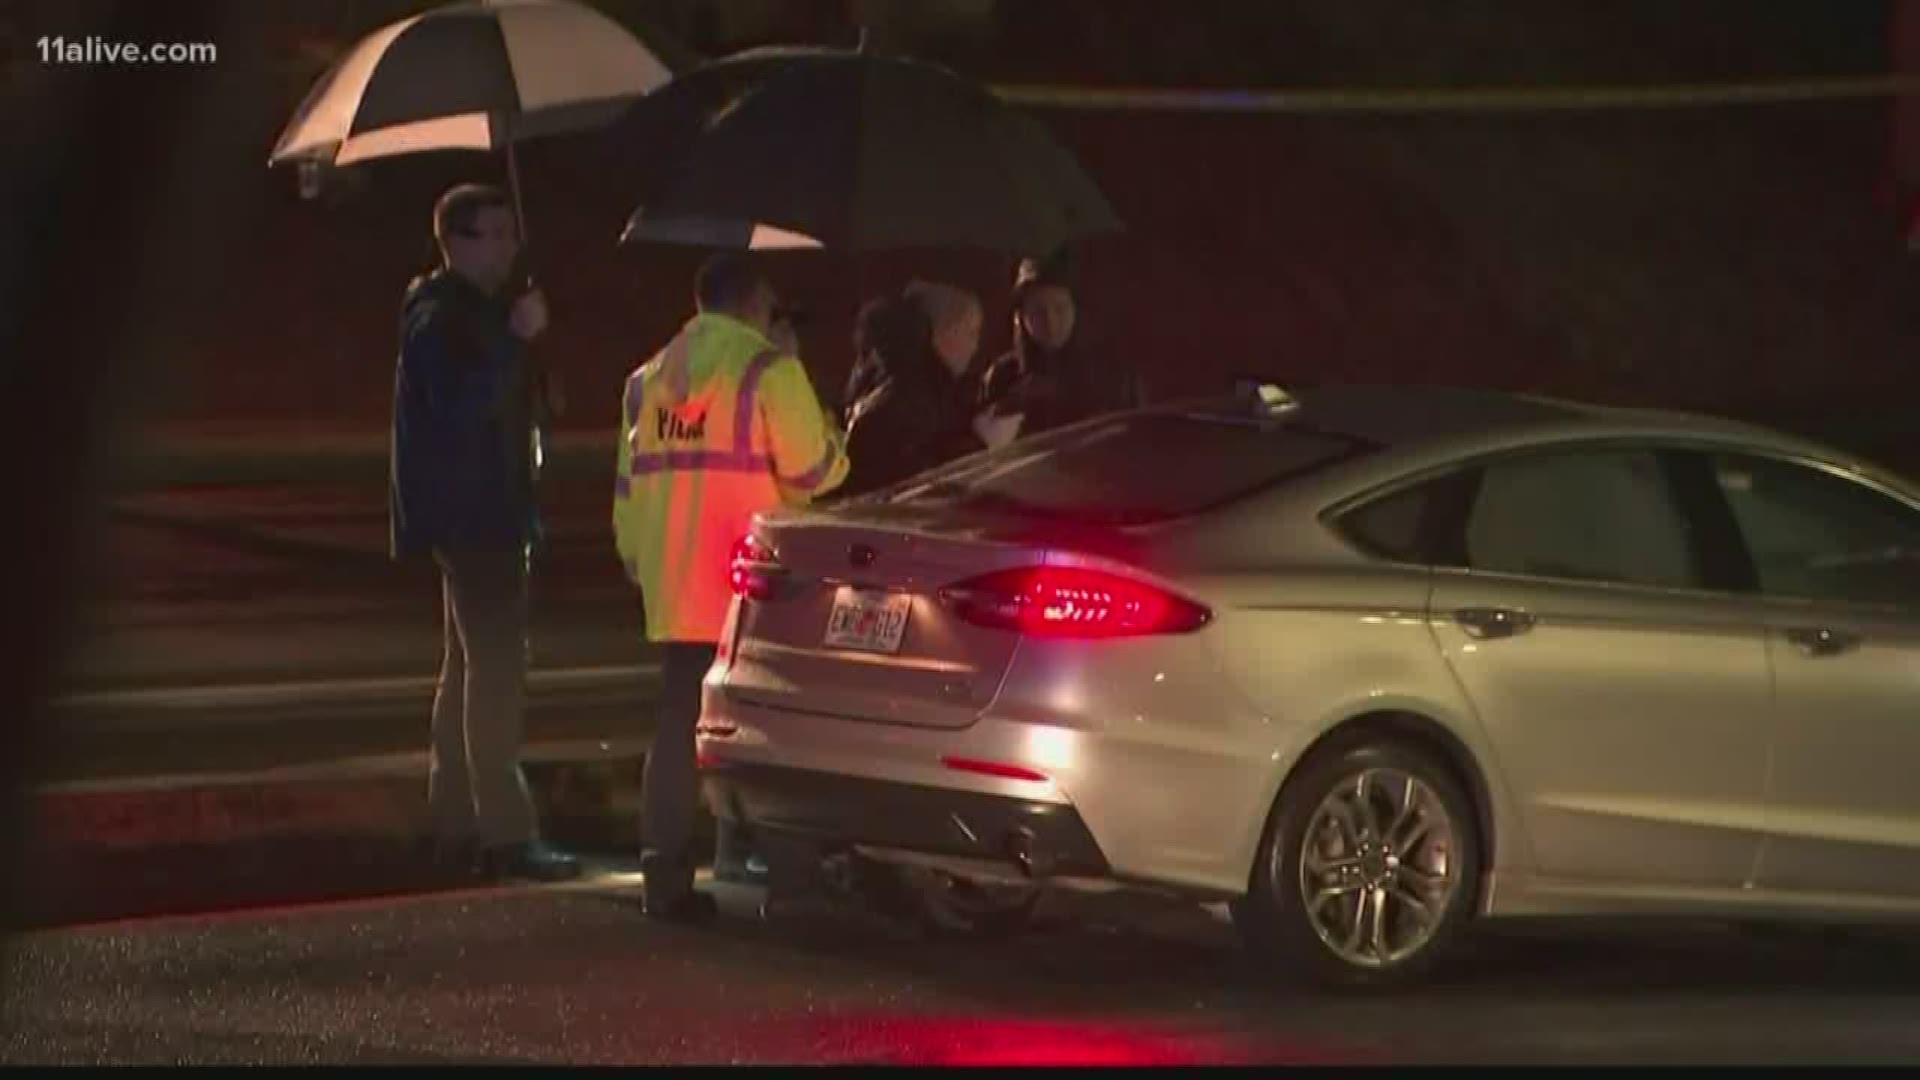 Police say a 20-year-old Lawrenceville man was shot at a gas station then crashed his car up the road.